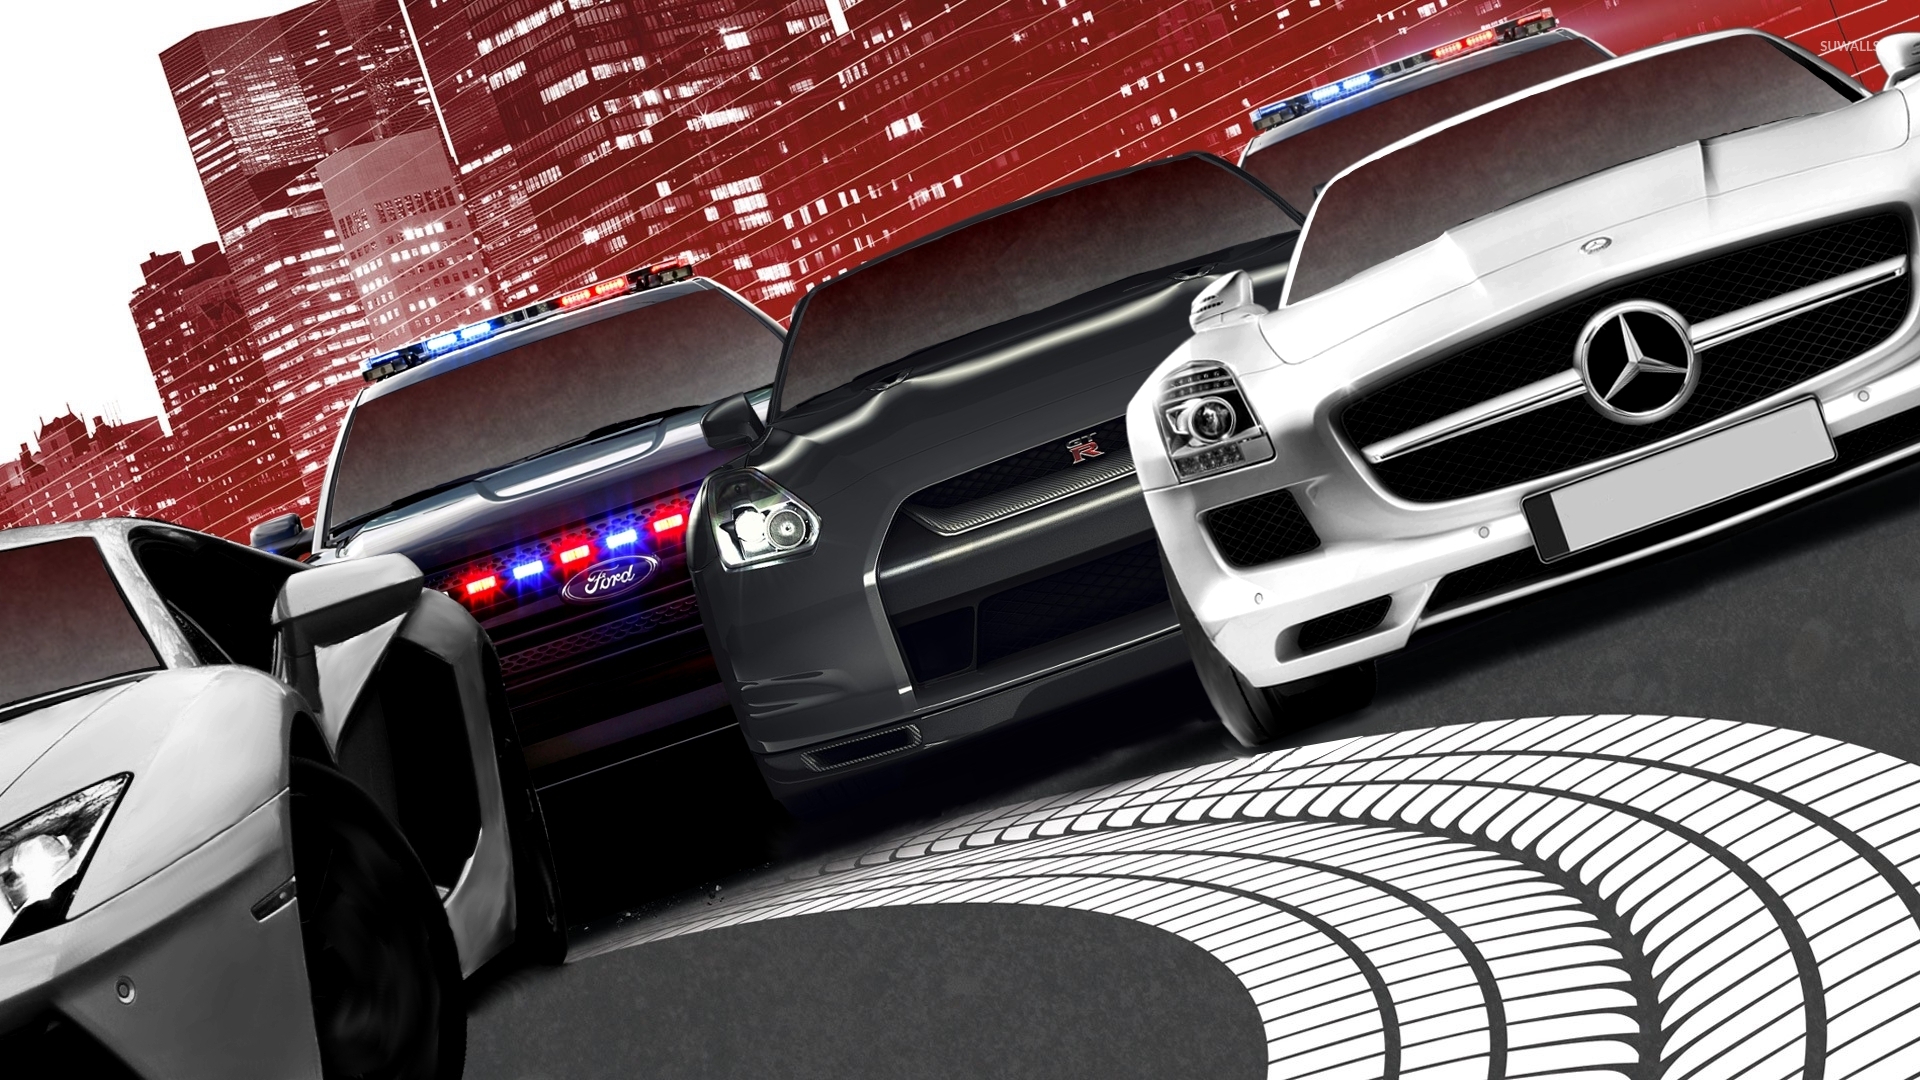 Need For Speed: Most Wanted (2012) Wallpapers